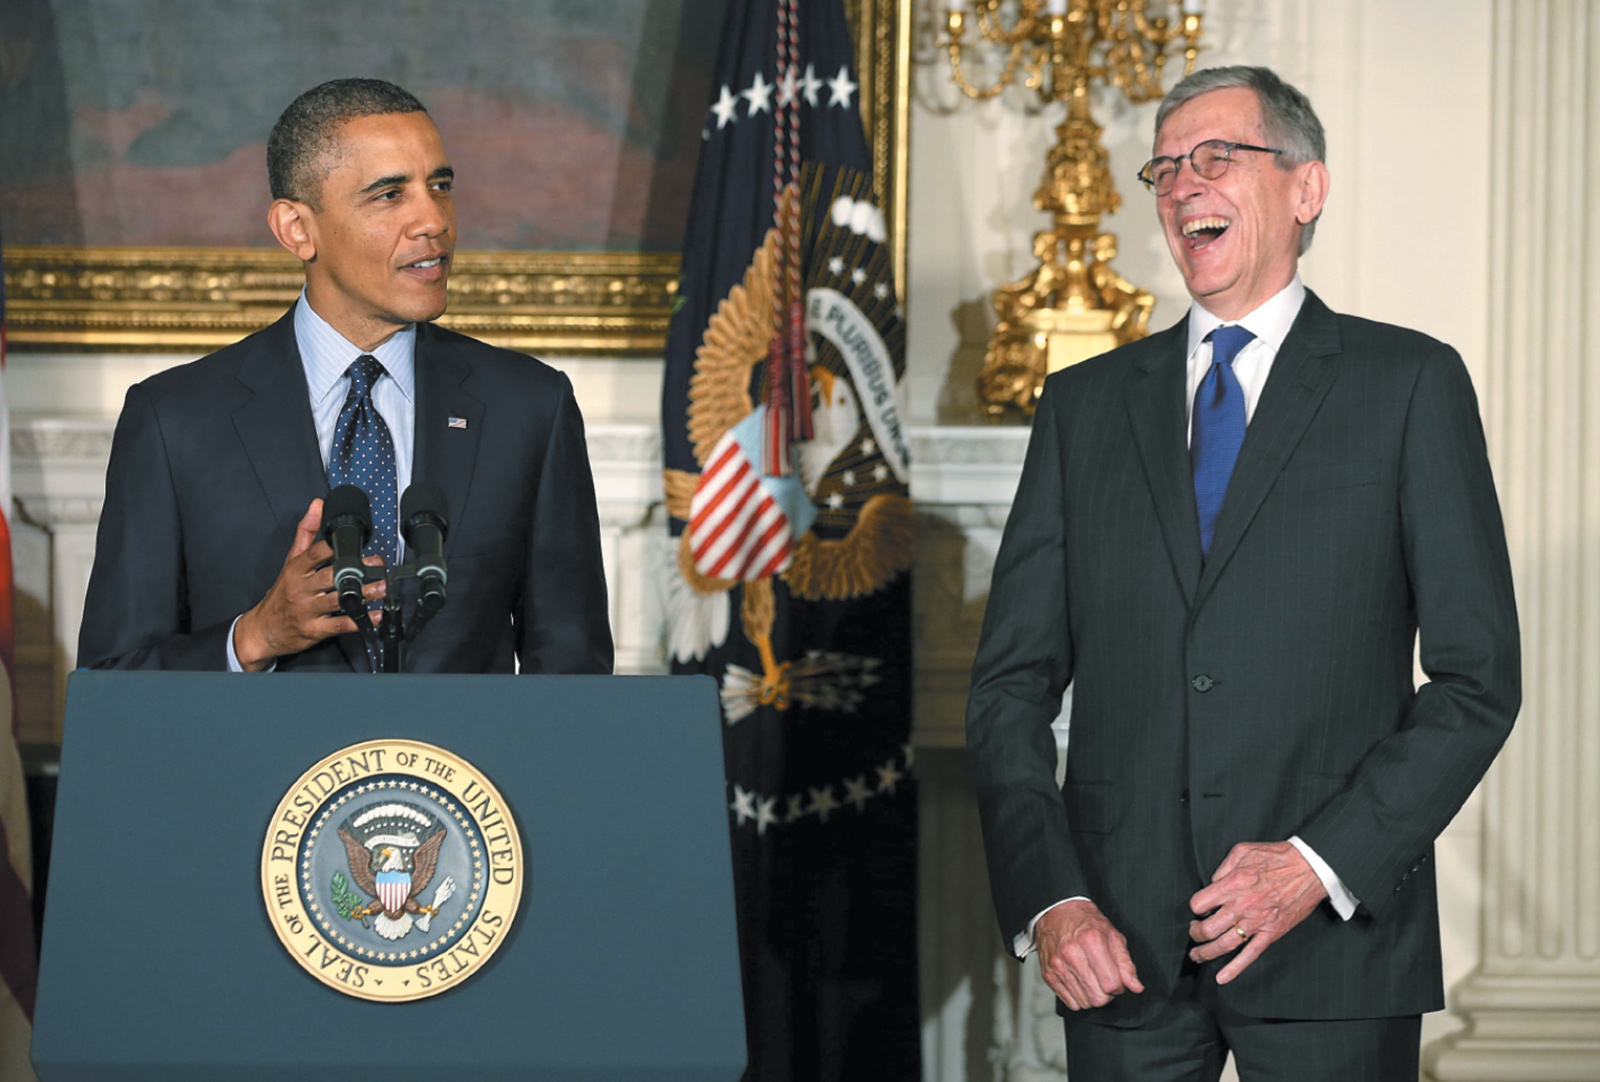 President Obama announcing his nomination of the telecom industry lobbyist Tom Wheeler as chairman of the Federal Communications Commission, May 2013